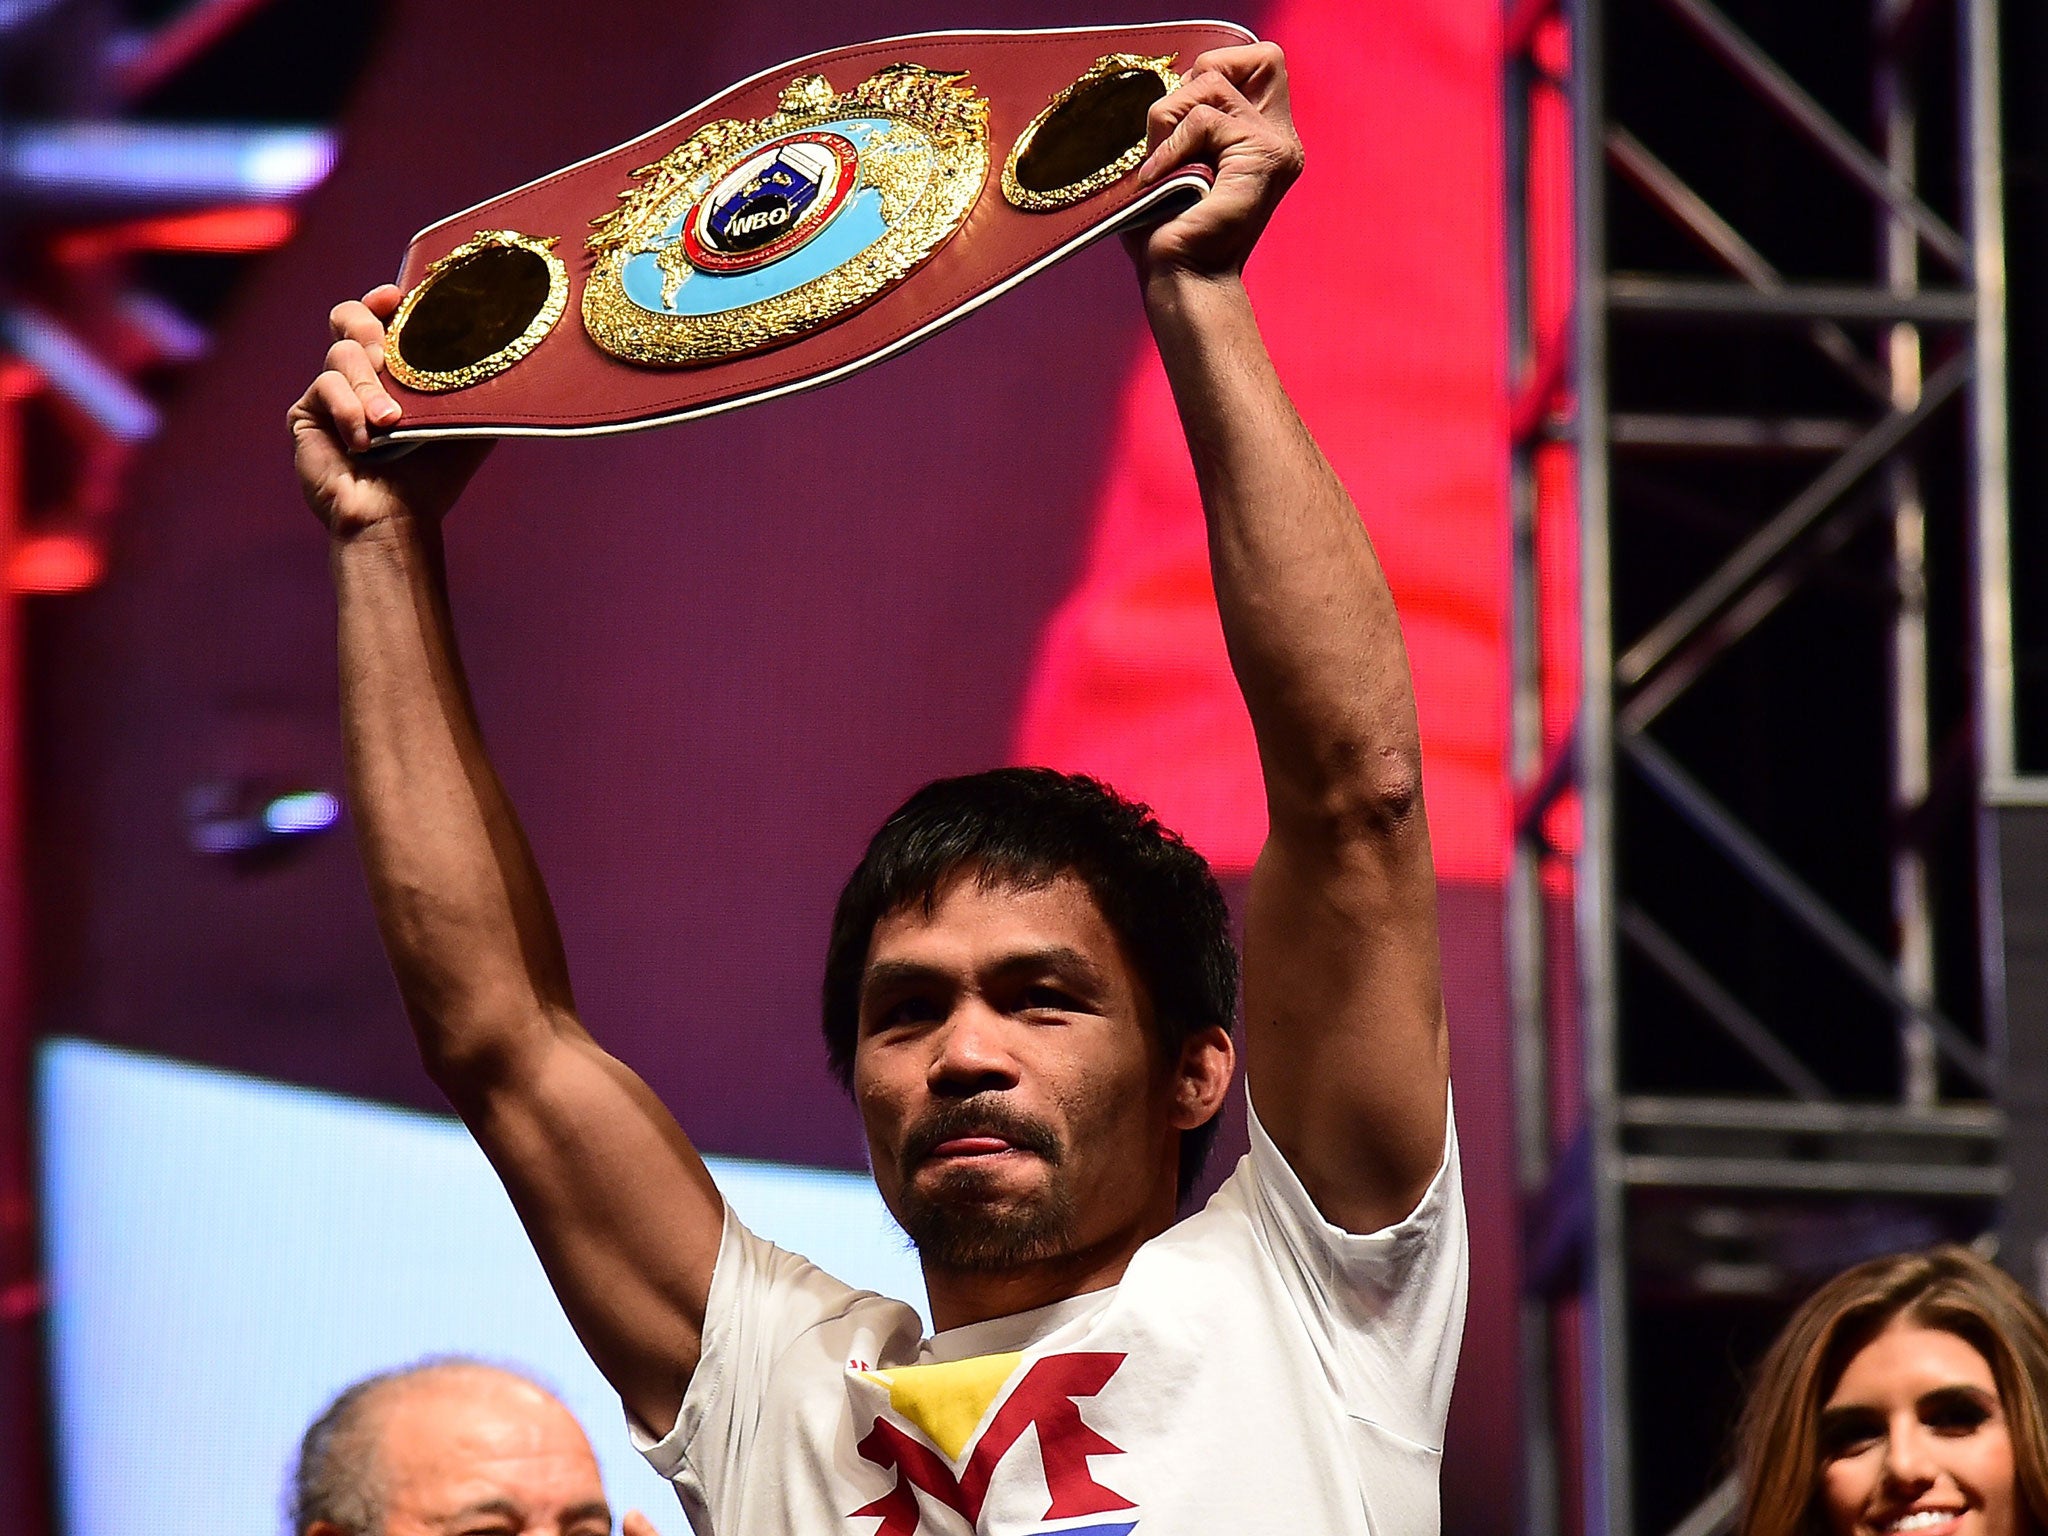 Manny Pacquaio holds up his WBO welterweight championship